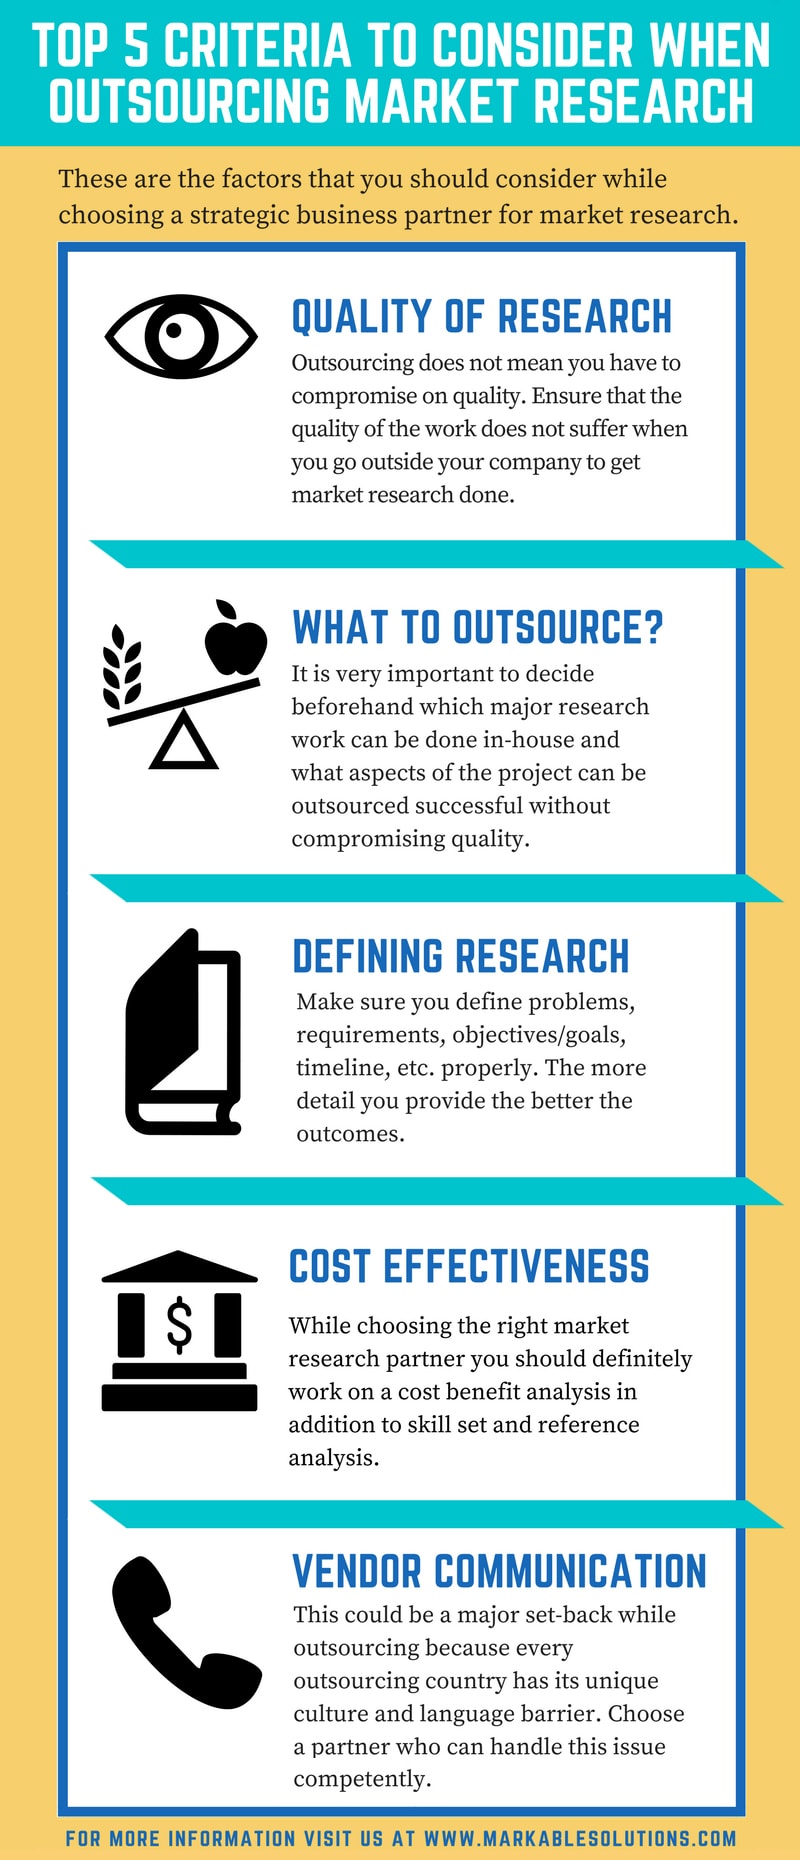 Top 5 Criteria to Consider When Outsourcing Market Research